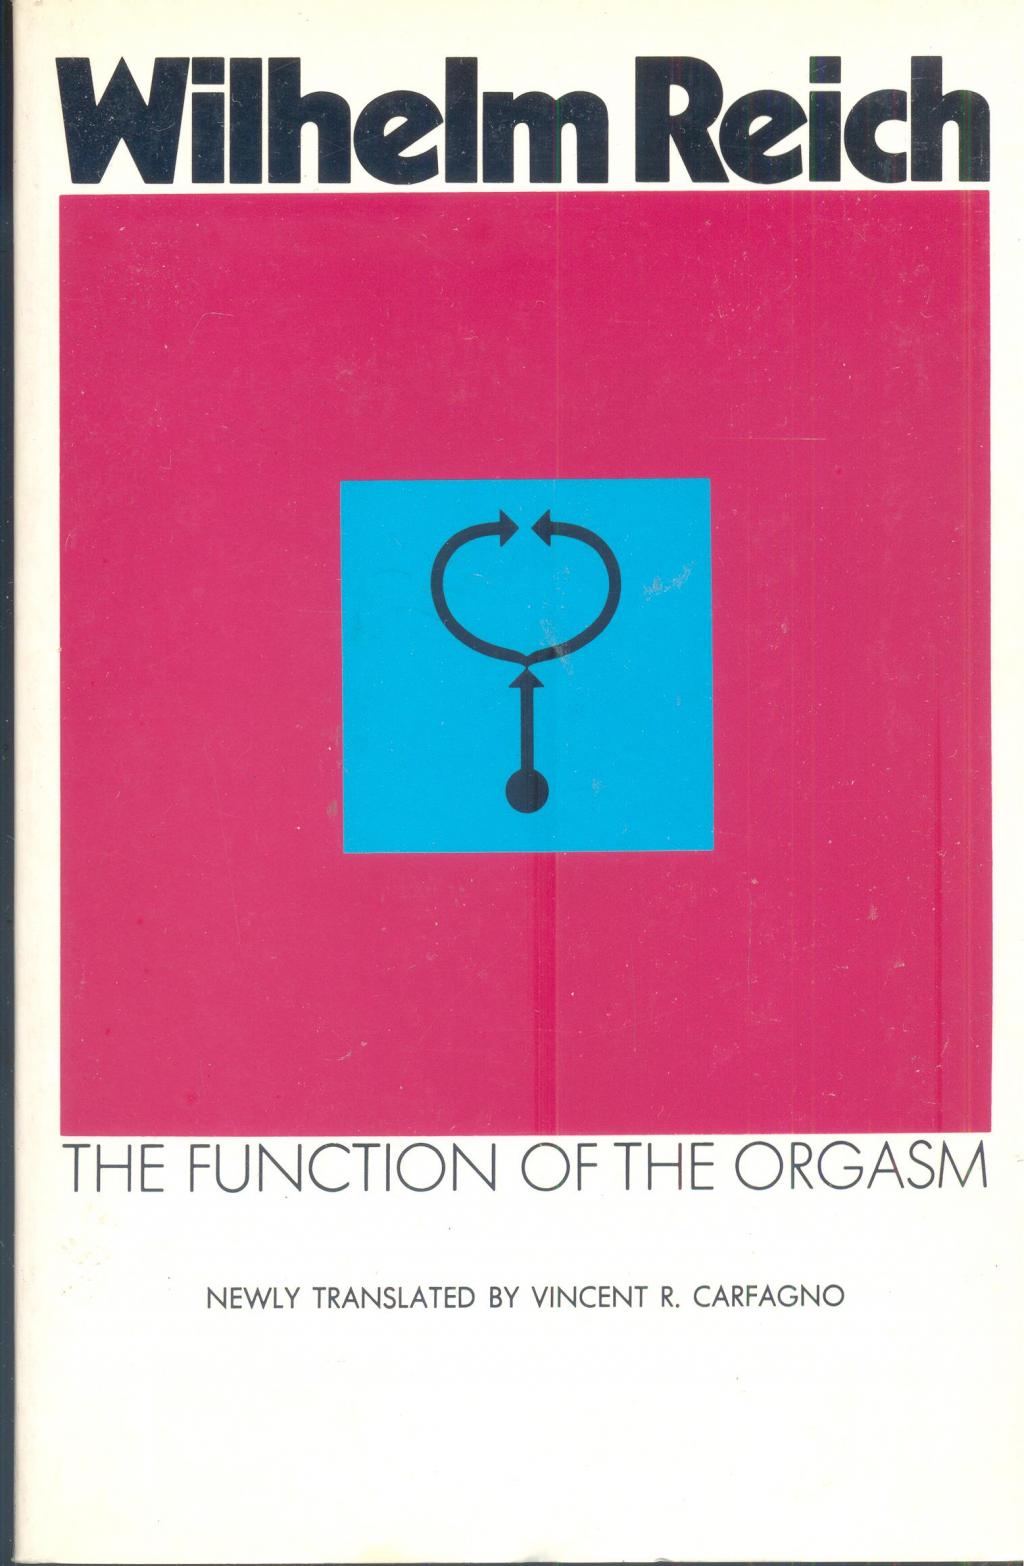 The function of the orgasm